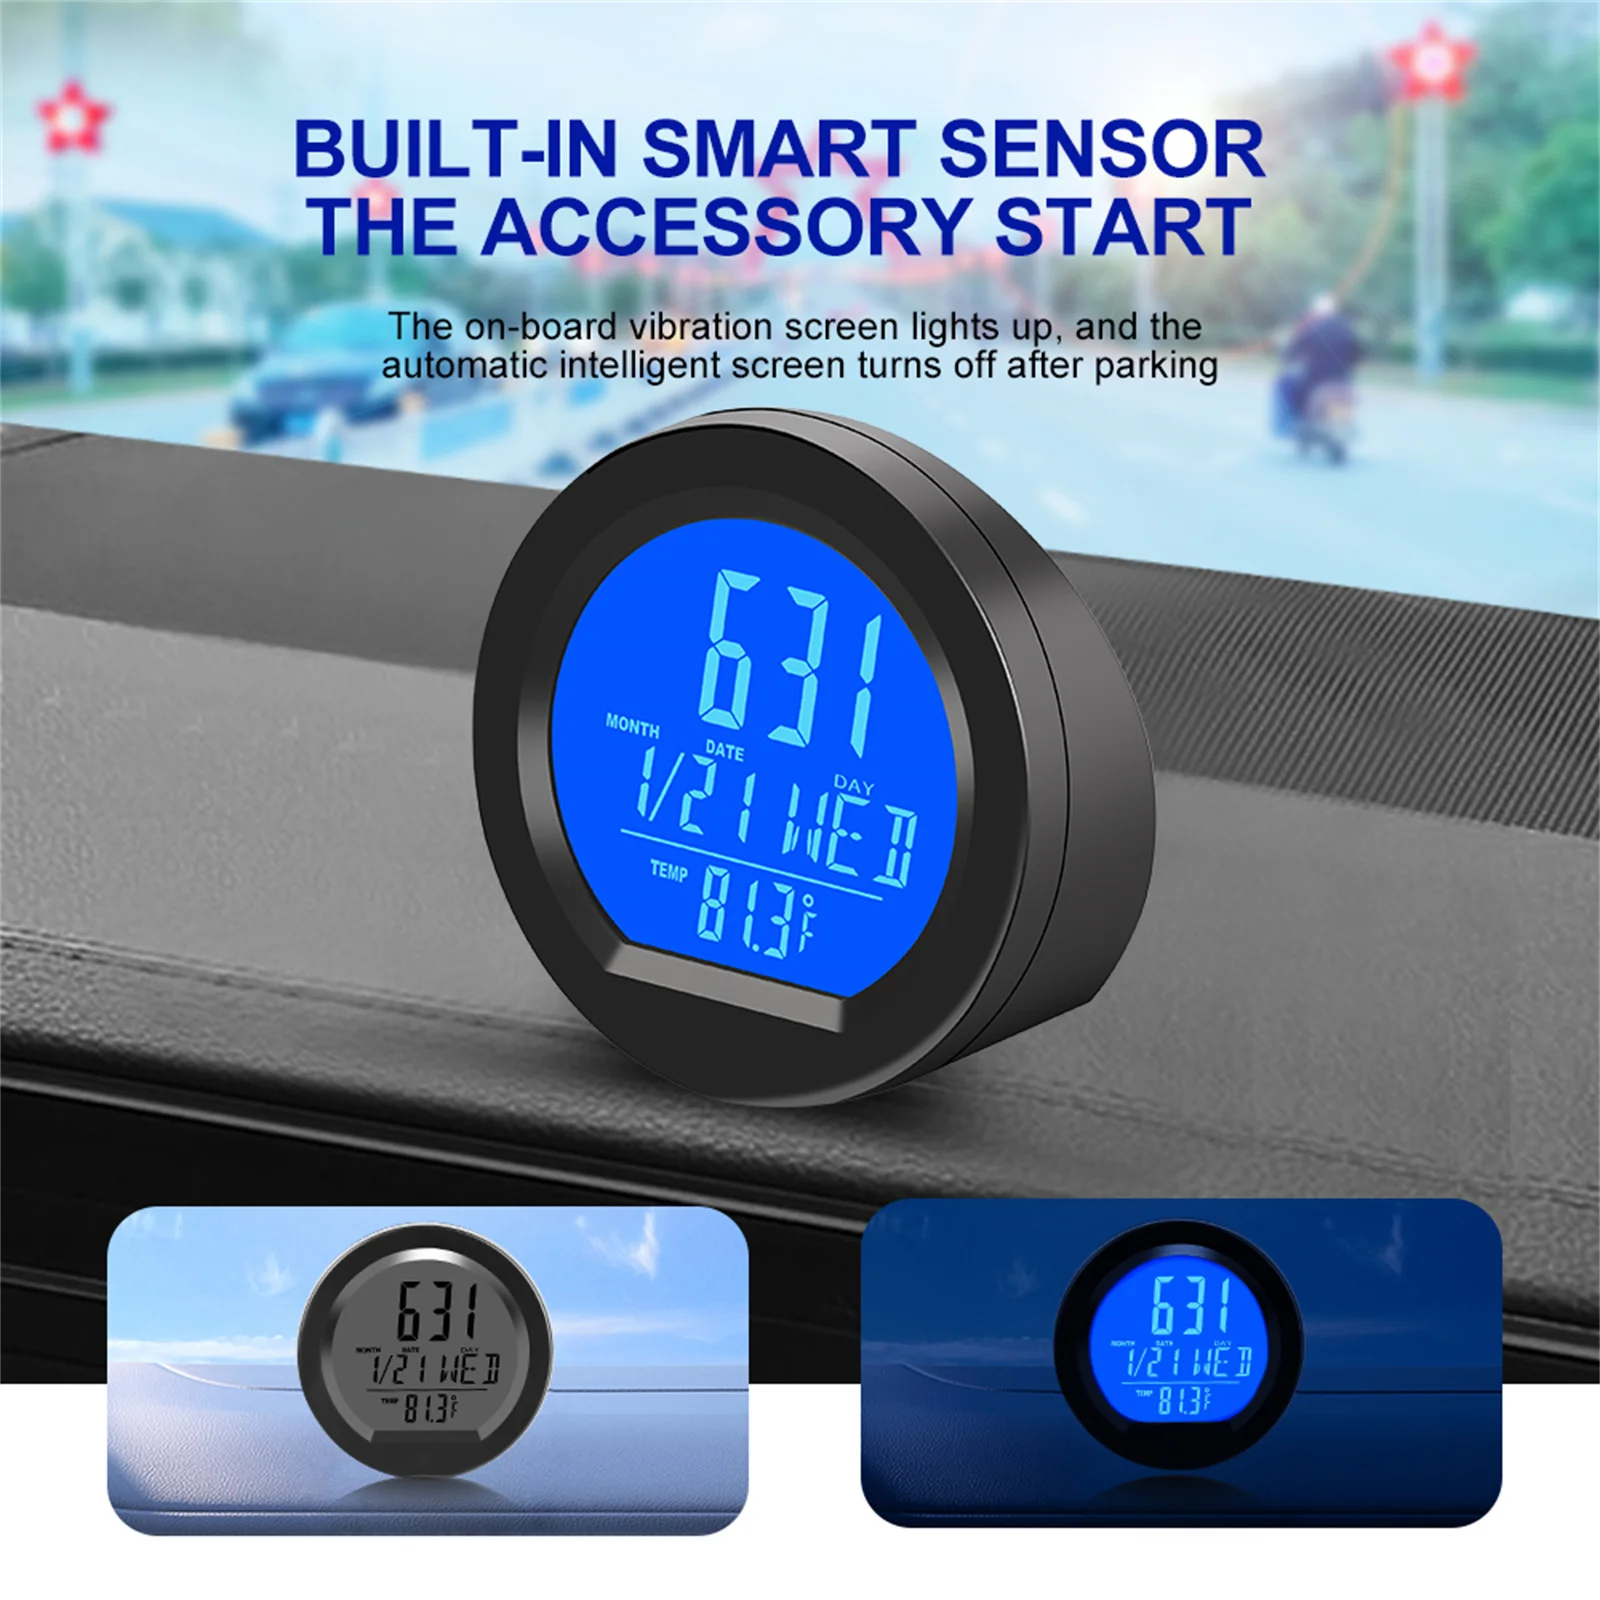 

Solar Car Clocks Dashboard Thermometer Automotive Electronic Watch Led Digital DisplayTime with Back Luminous Car Accessories